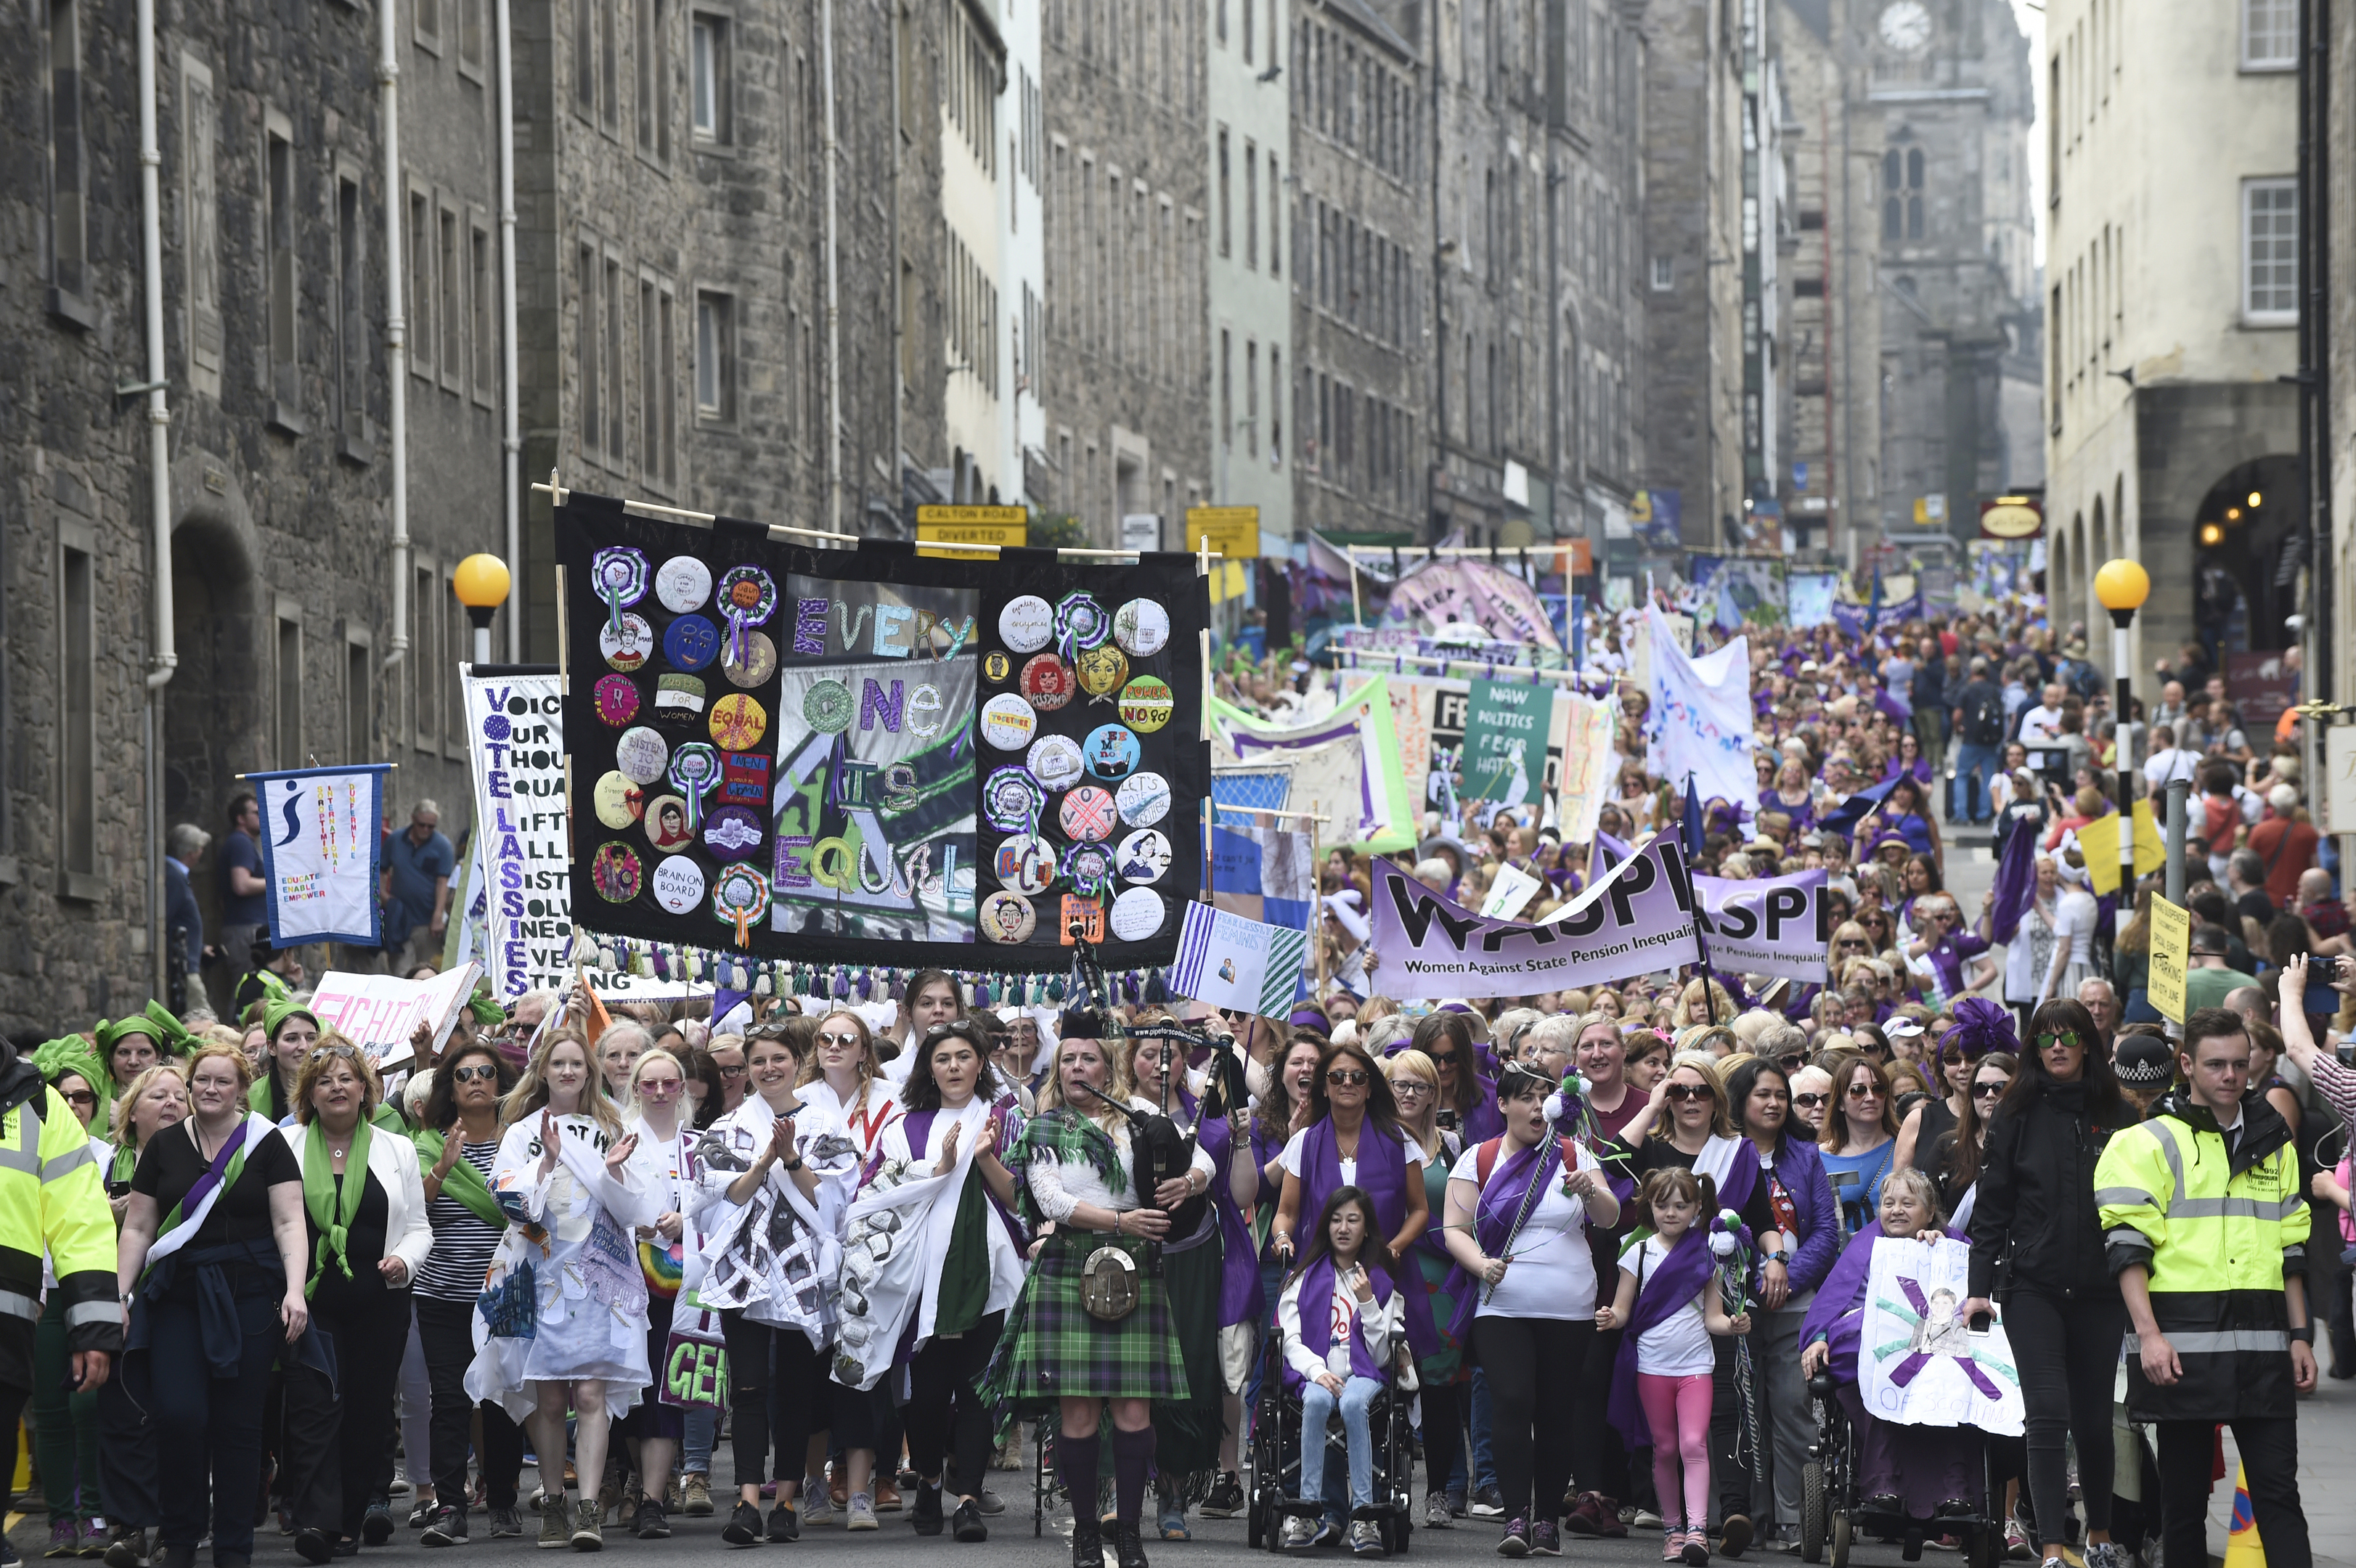 Women and girls walk together wearing scarves in either green, white or violet - the suffragette colours for Processions Edinburgh. The WASPI banner is clearly visible.